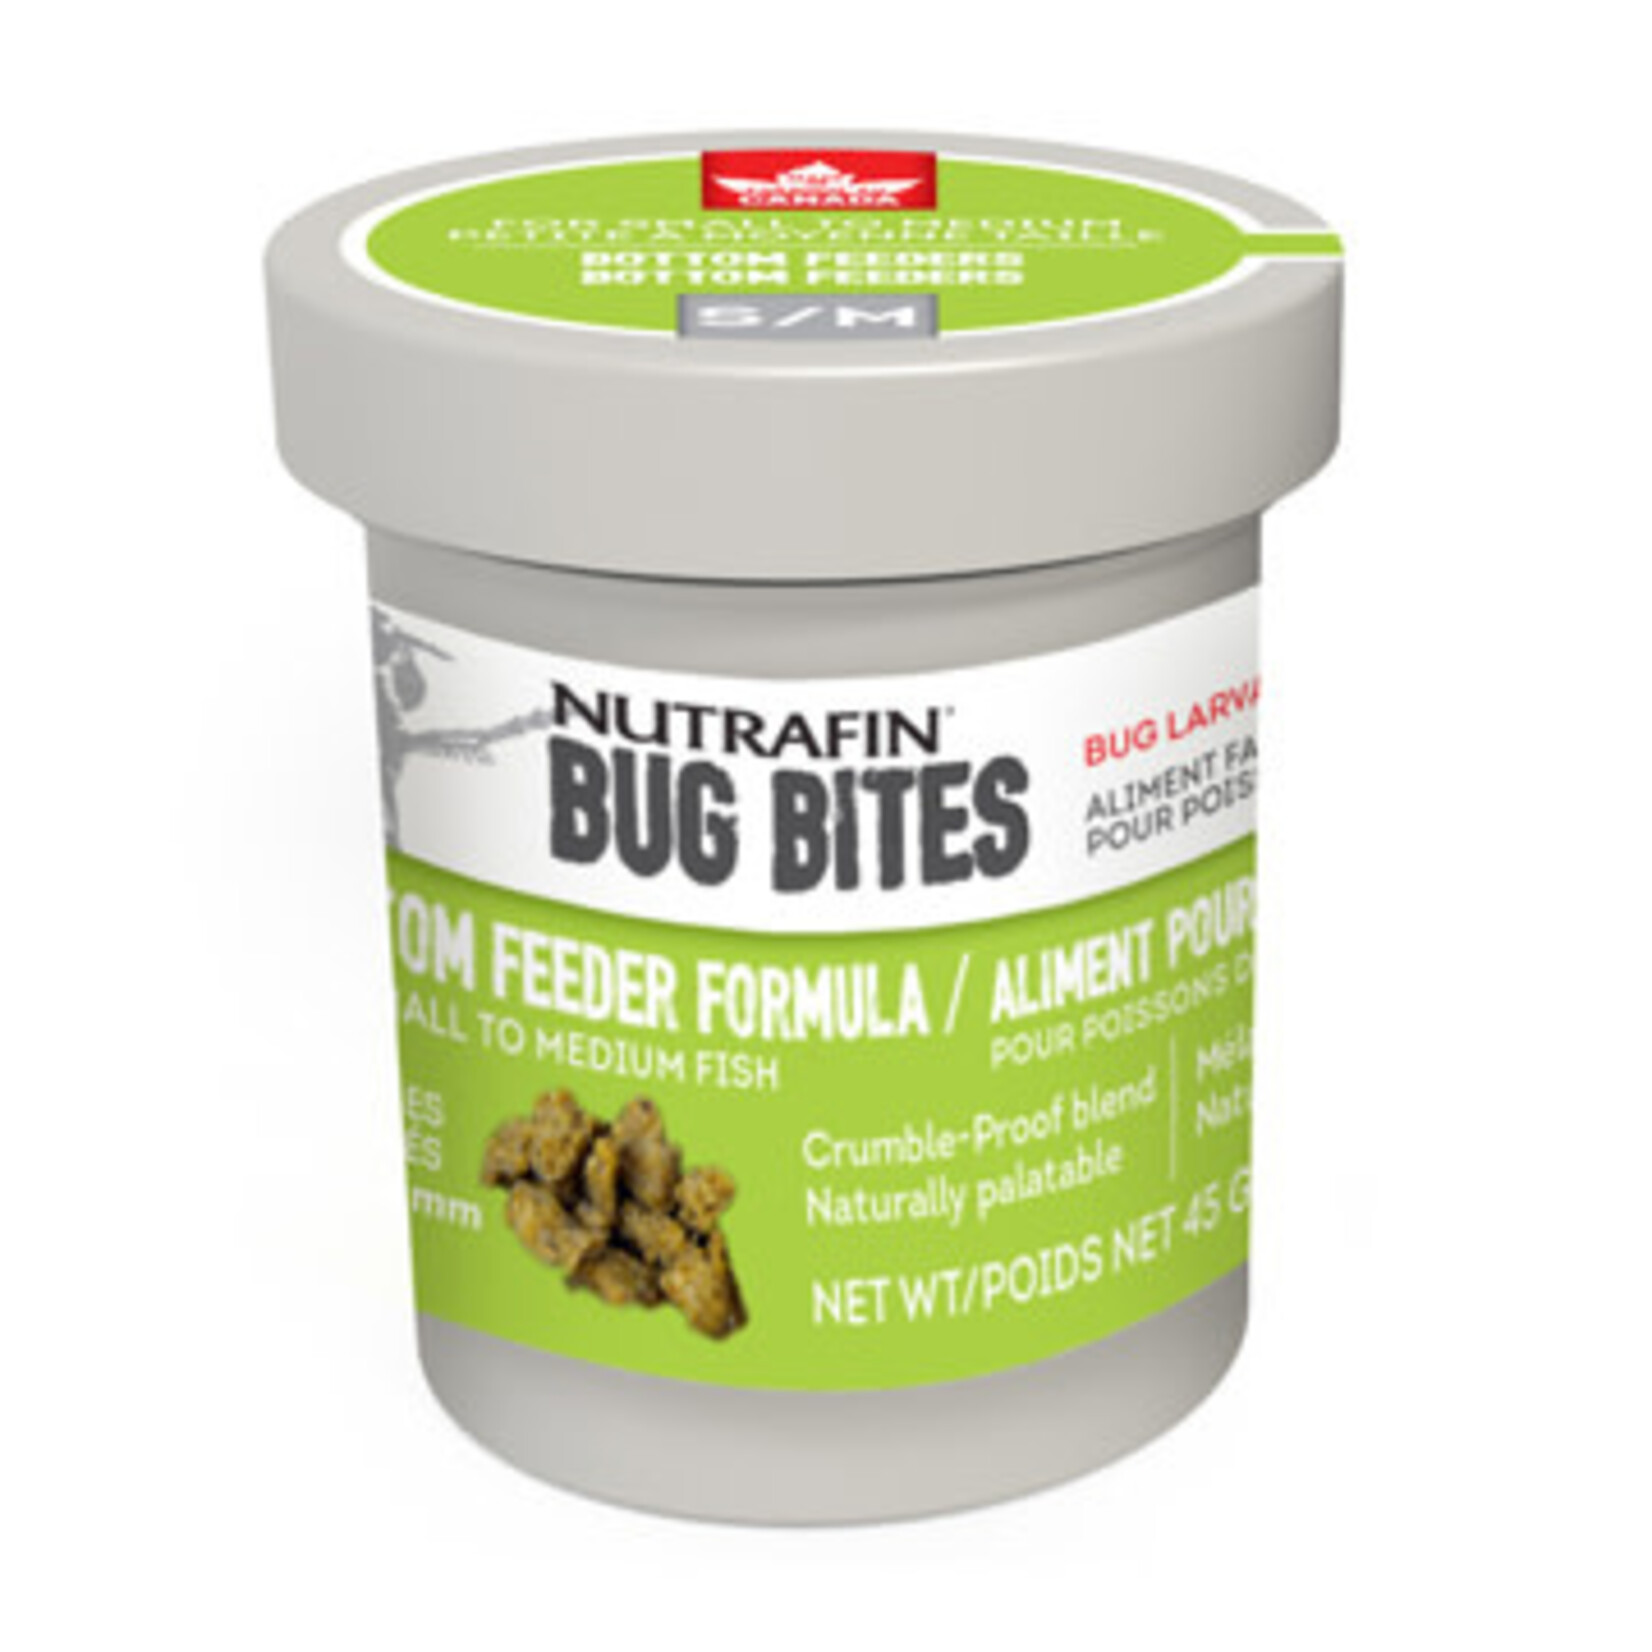 Nutrafin Nutrafin Bug Bites Bottom Feeder Small-Medium 1.4-1.6mm Granules for Corys, Loaches and Wide Mouth Catfish